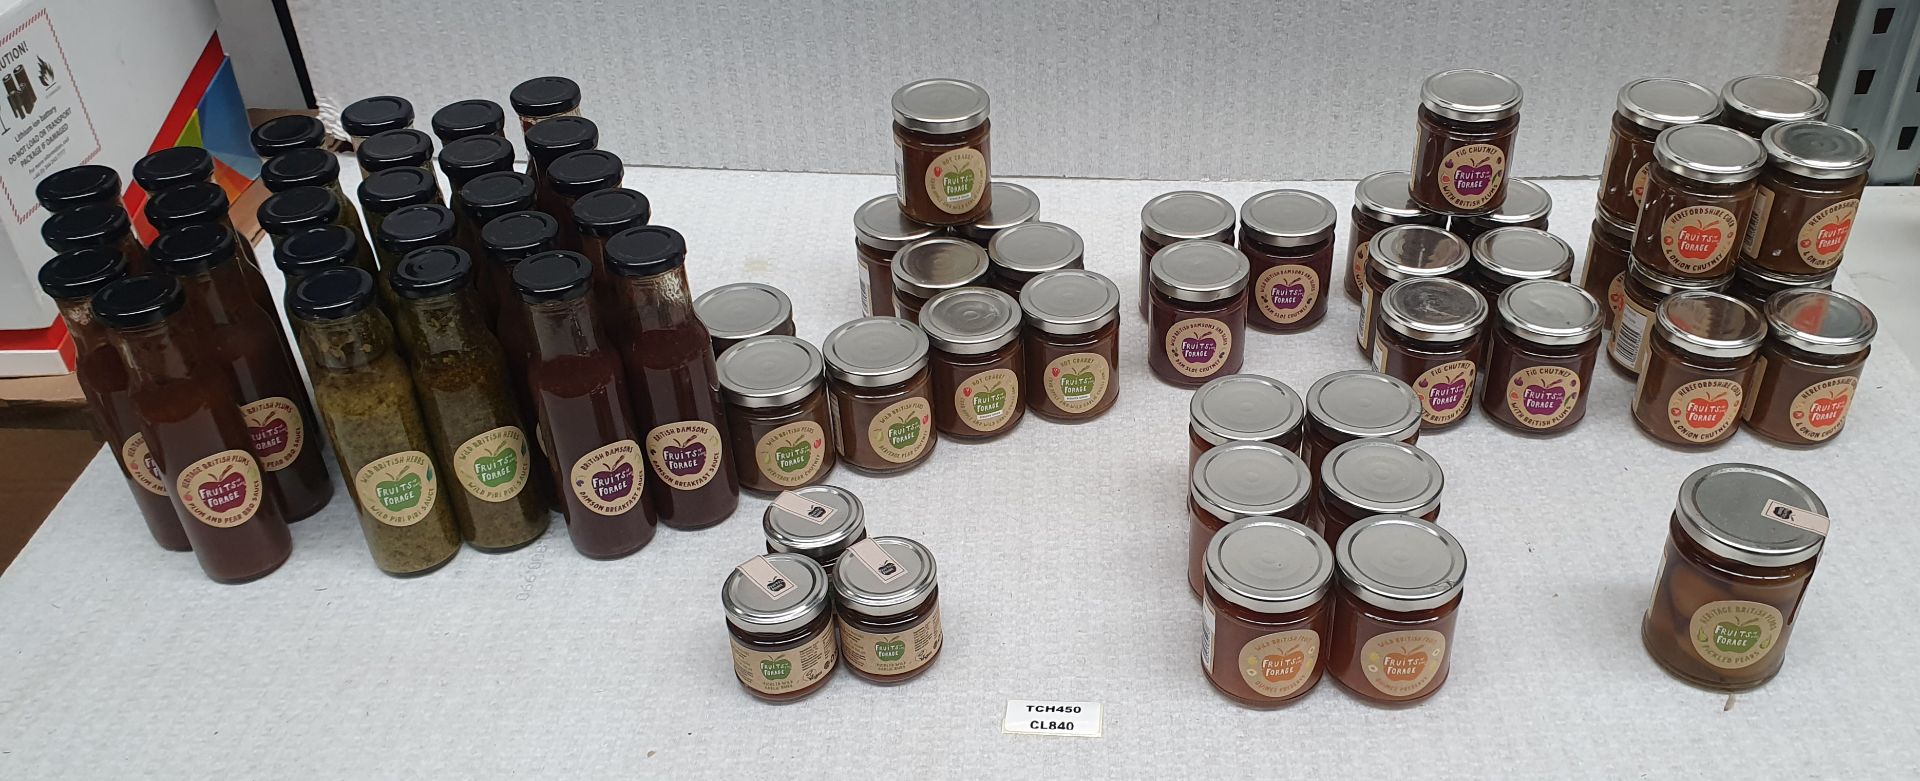 63 x Jars/Bottles of Fruits of Forage Sauces/Chutneys/Pickled Food - Ref: TCH450 - CL840 - Location: - Image 13 of 15